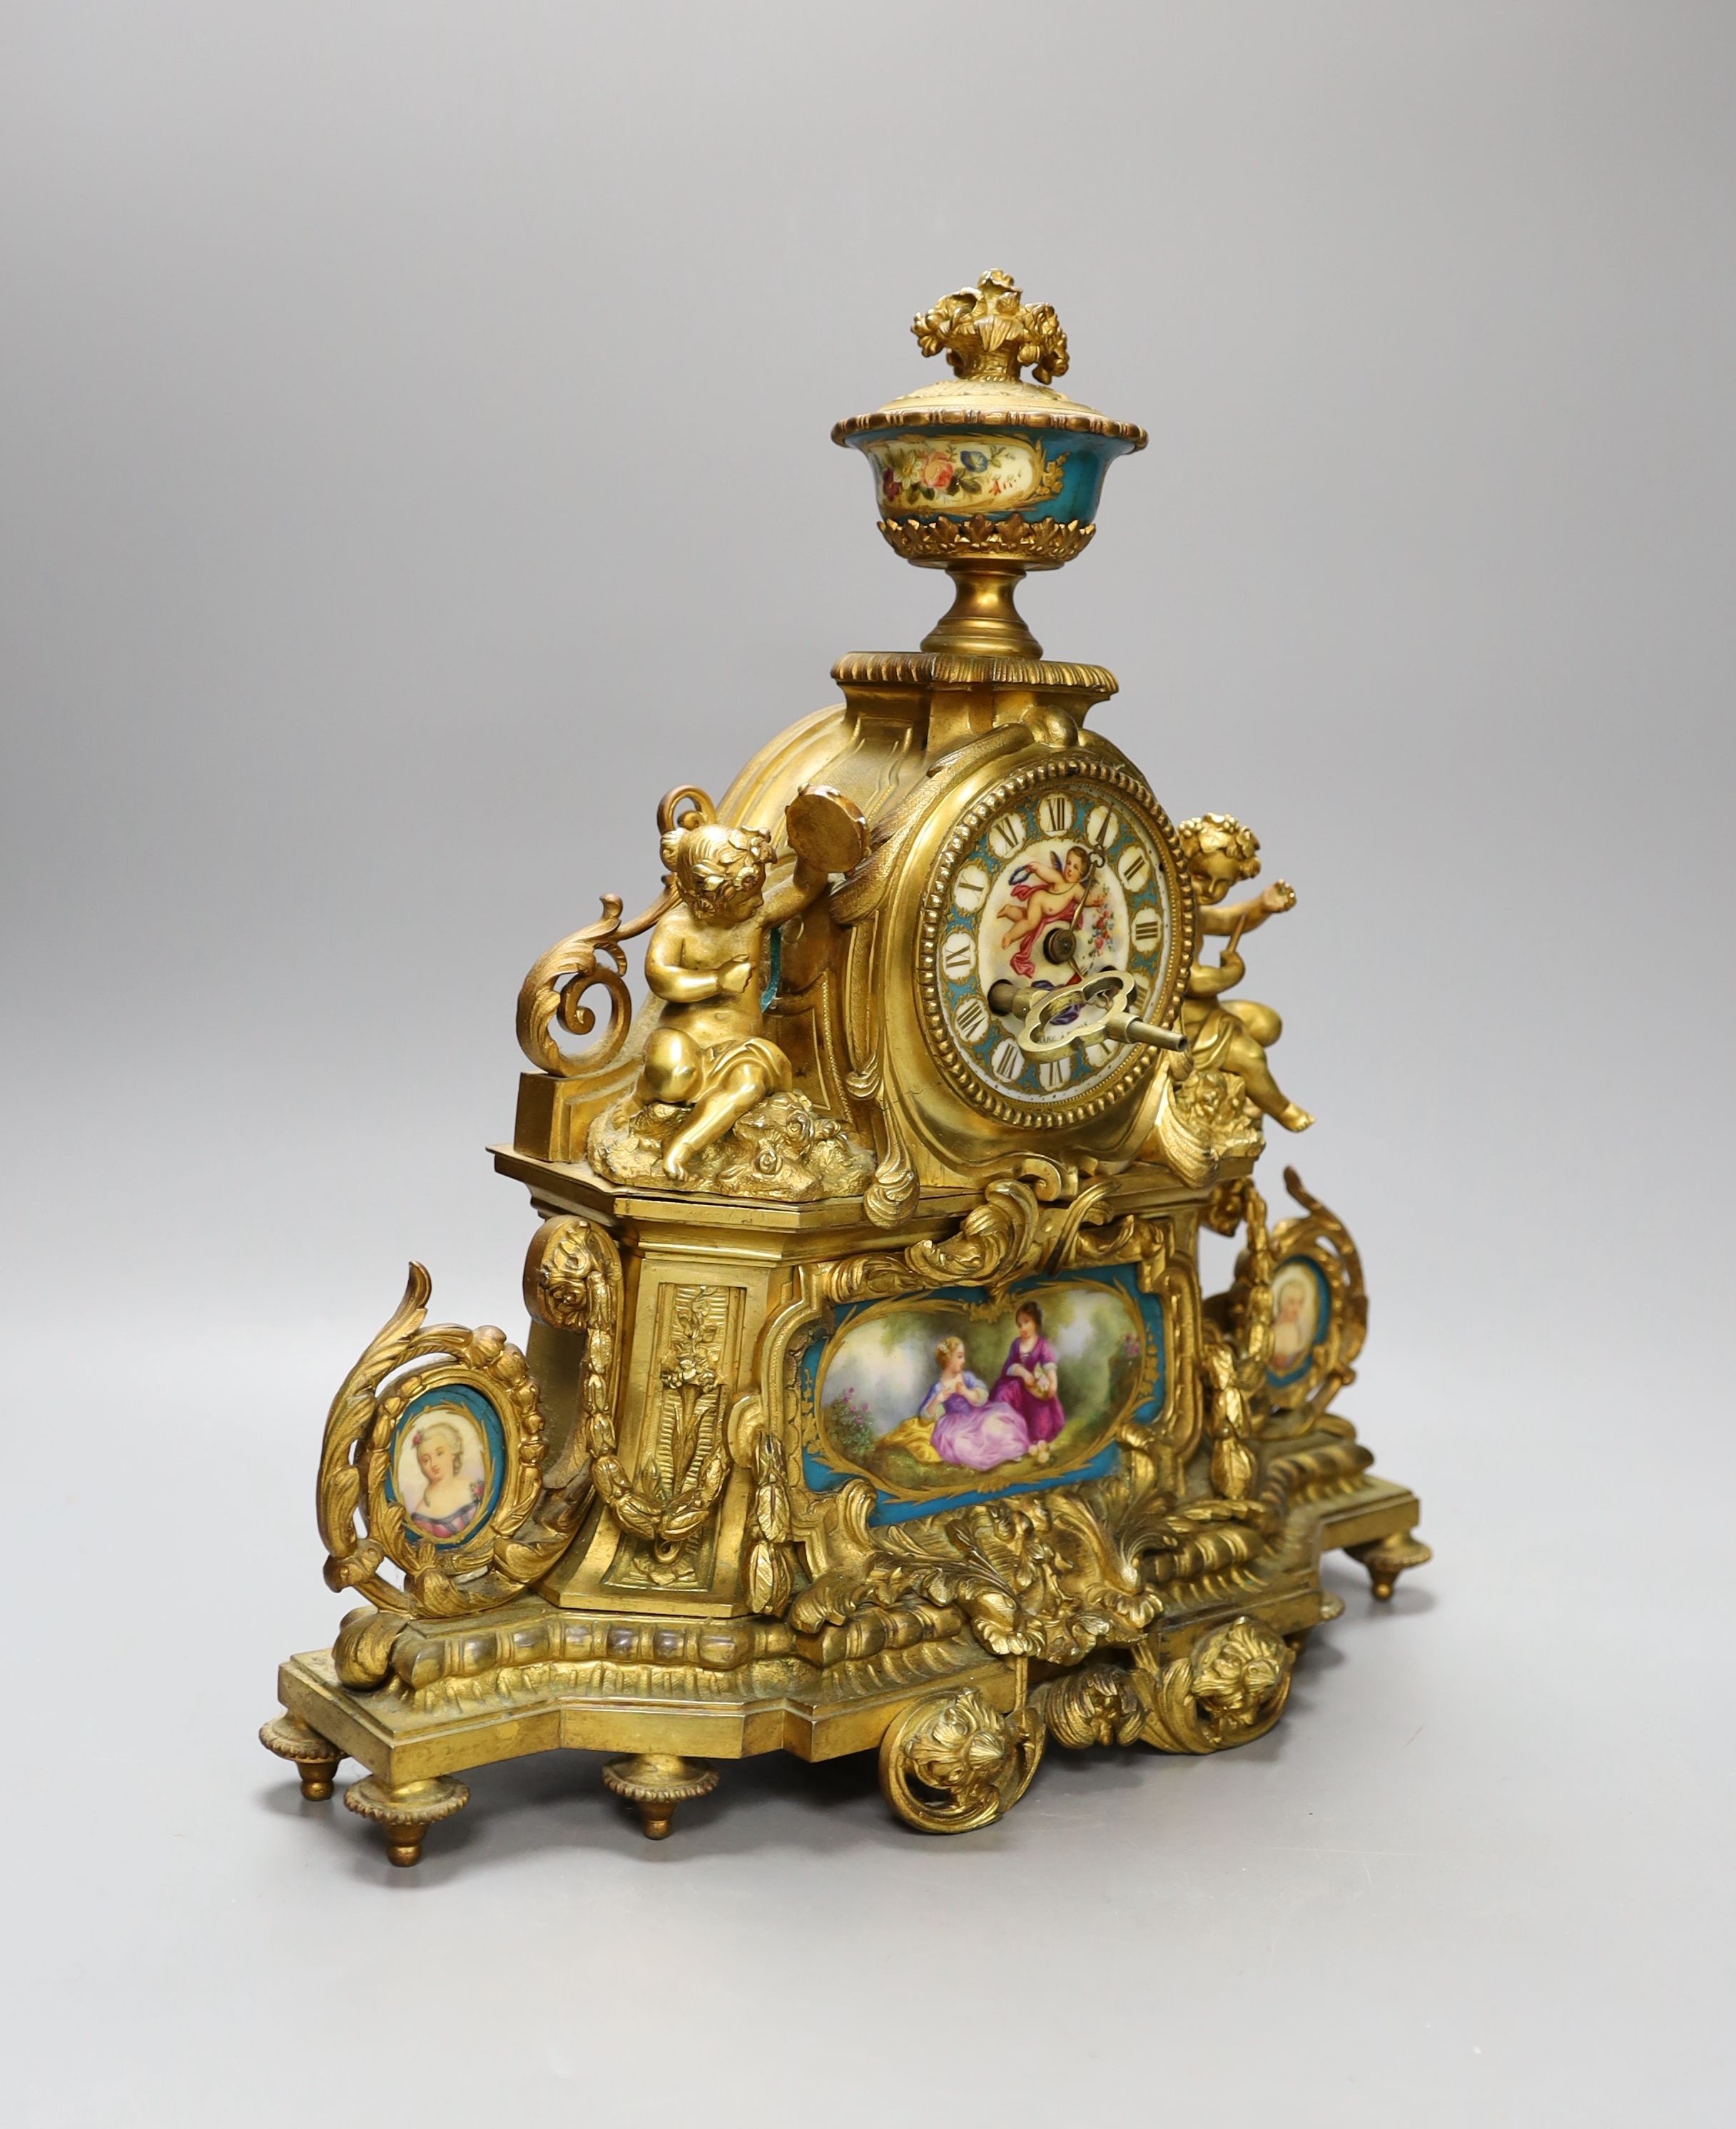 A 19th century French ormolu and Sevres style porcelain mounted mantel clock, with key and pendulum, 35 cm high